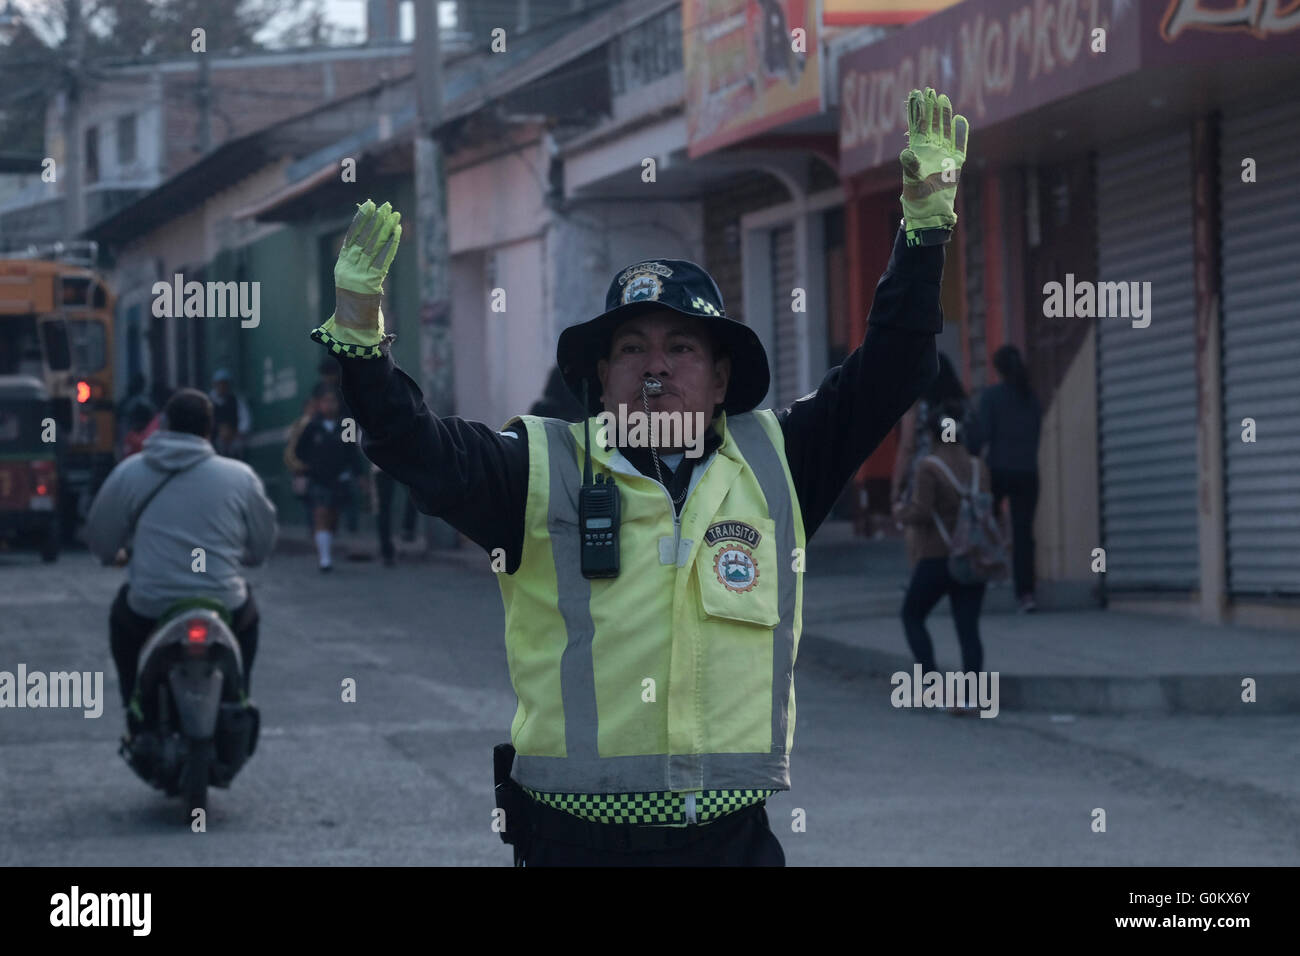 Police directing traffic in Chichicastenango a town in the El Quiche department of Guatemala, known for its traditional Kiche Maya culture. Stock Photo